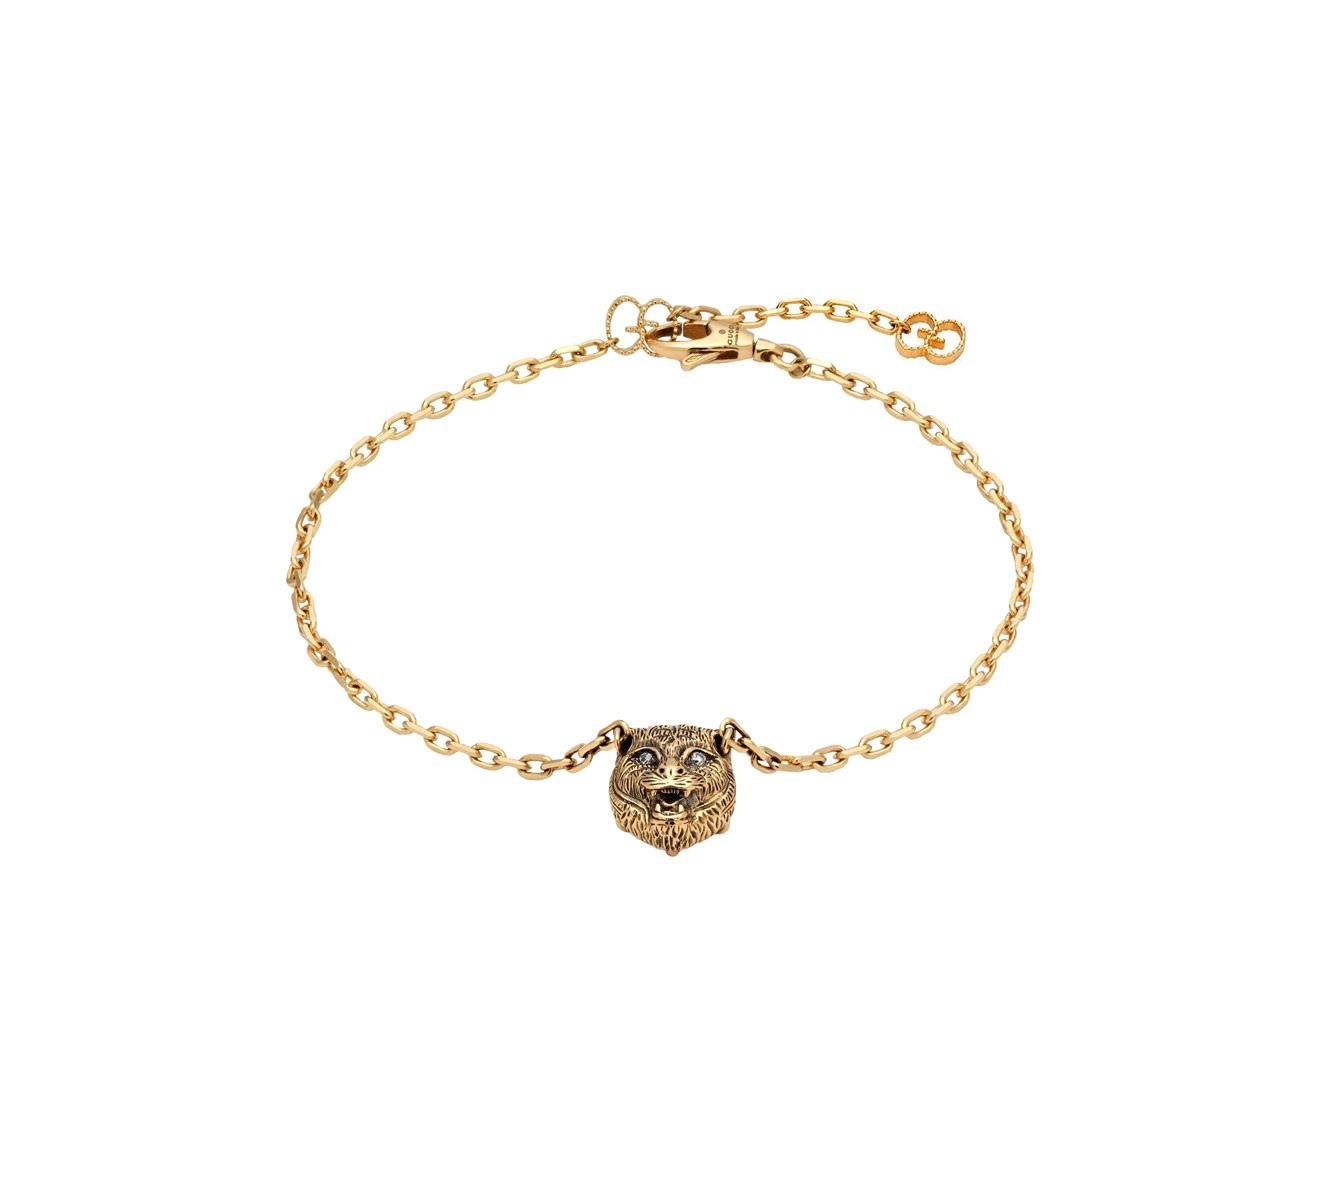 This bracelet from Gucci''s Le Marche des Merveilles collection is exquisitely handcrafted and detailed. Comprised of 18K yellow gold, it presents a feline head with a distinctly different design on each side: a turquoise gemstone and carved flower